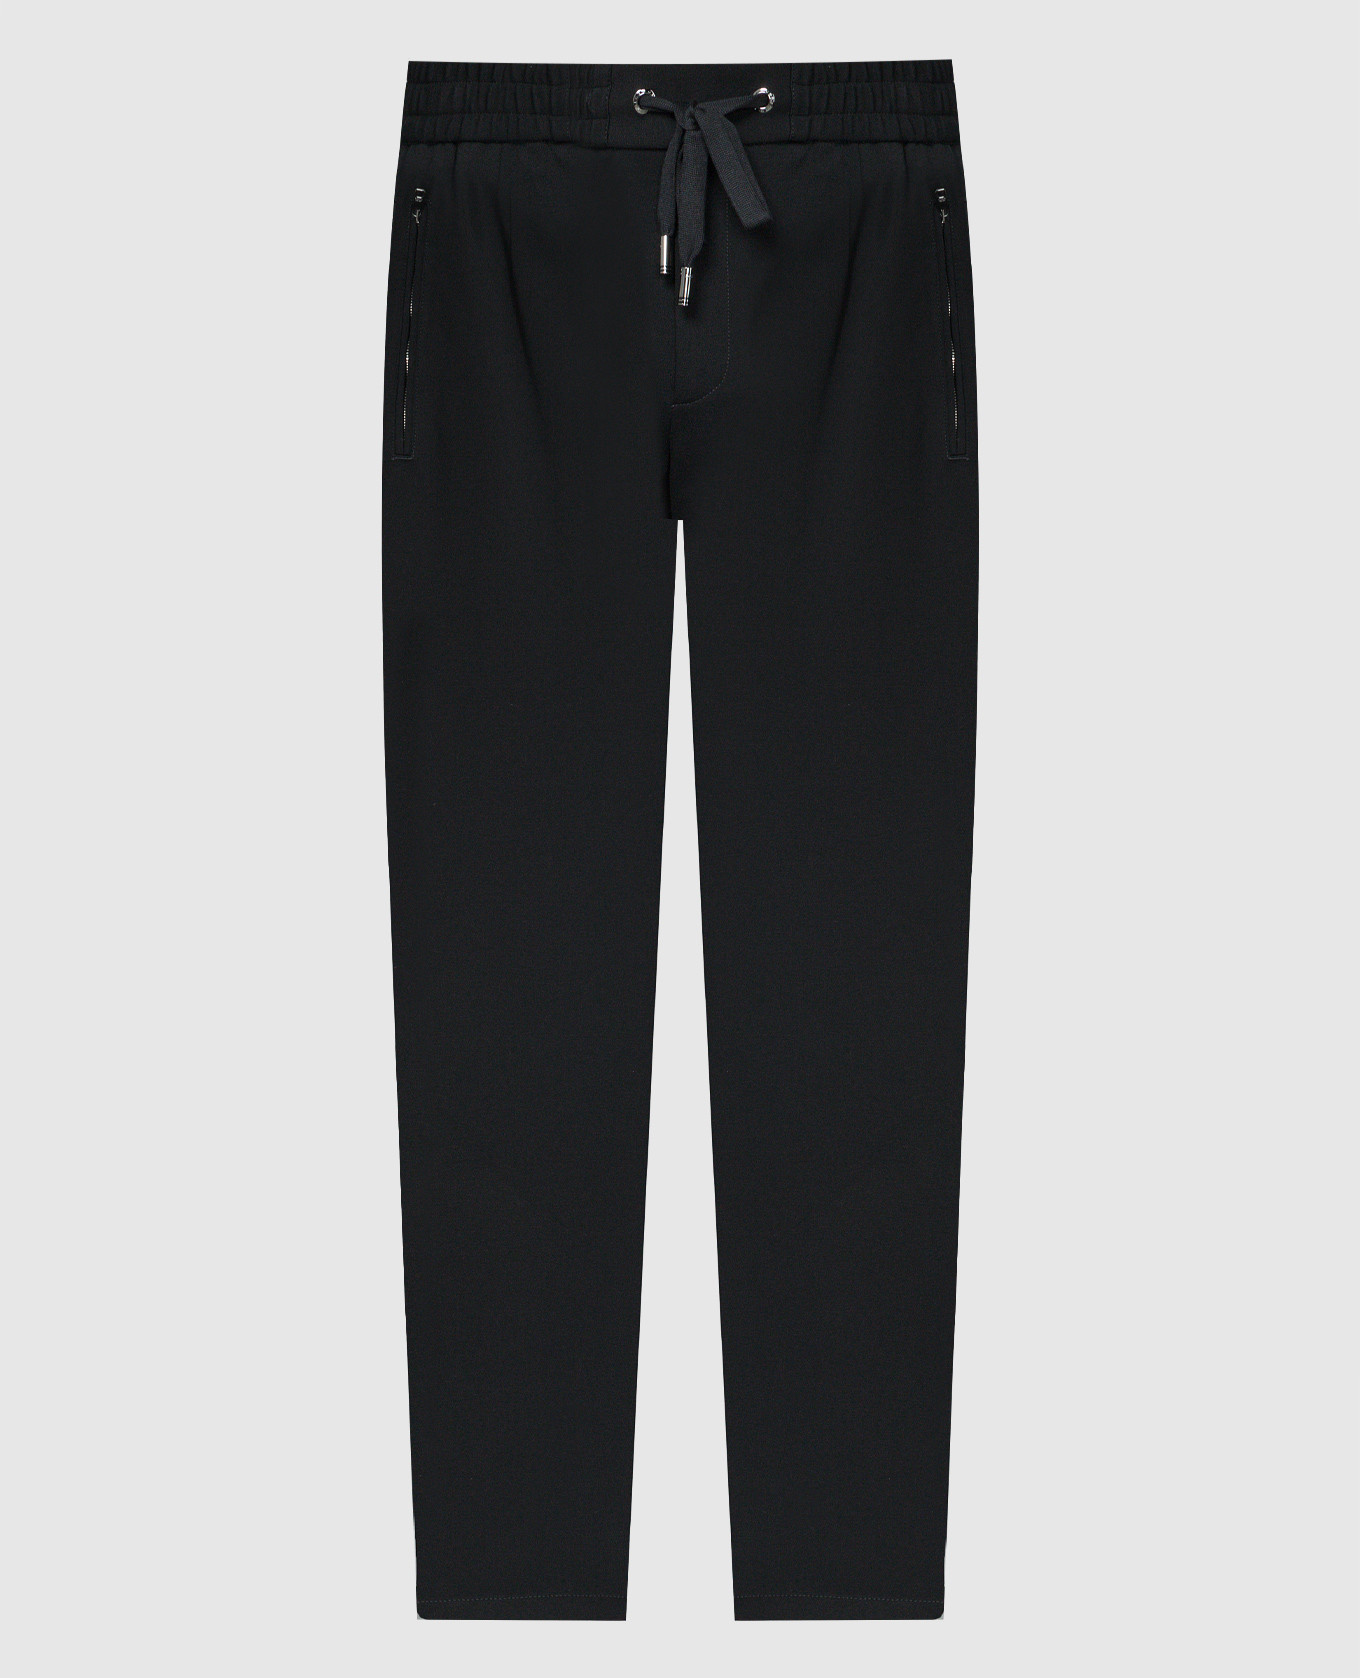 Black sweatpants with logo embroidery